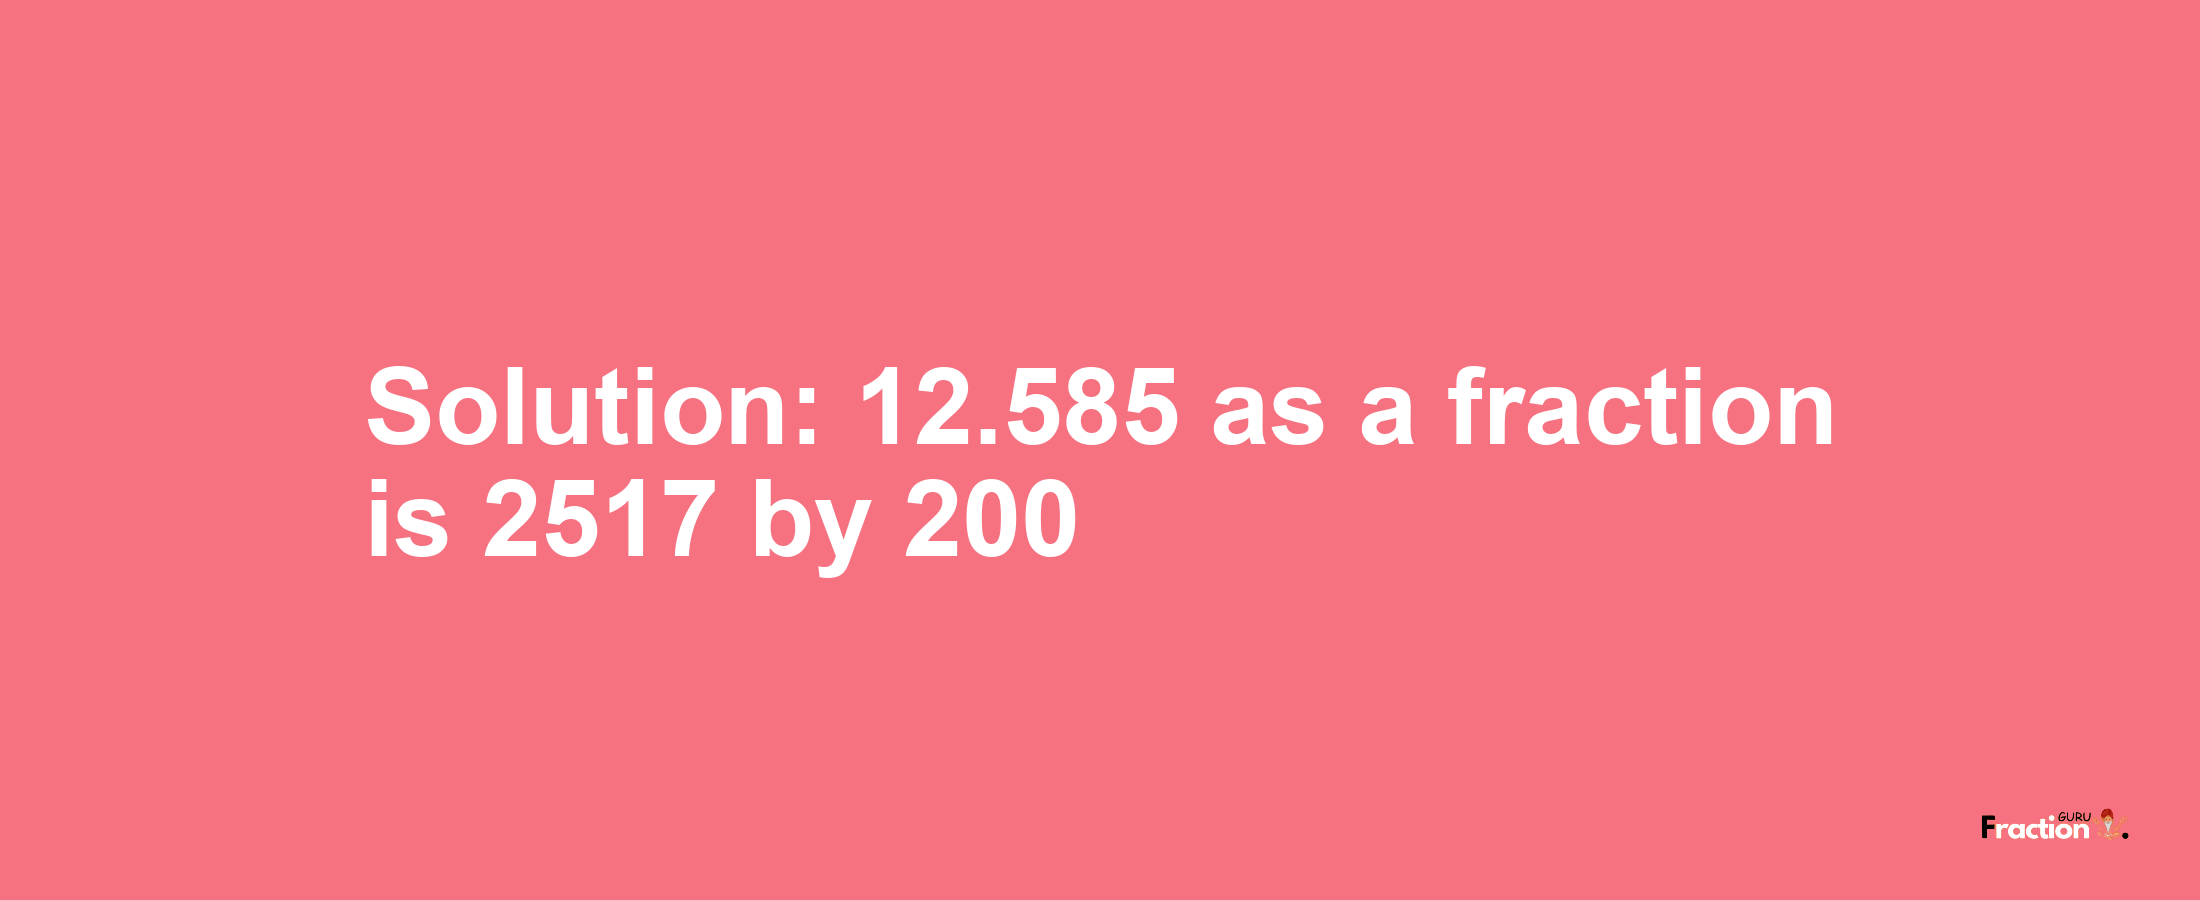 Solution:12.585 as a fraction is 2517/200